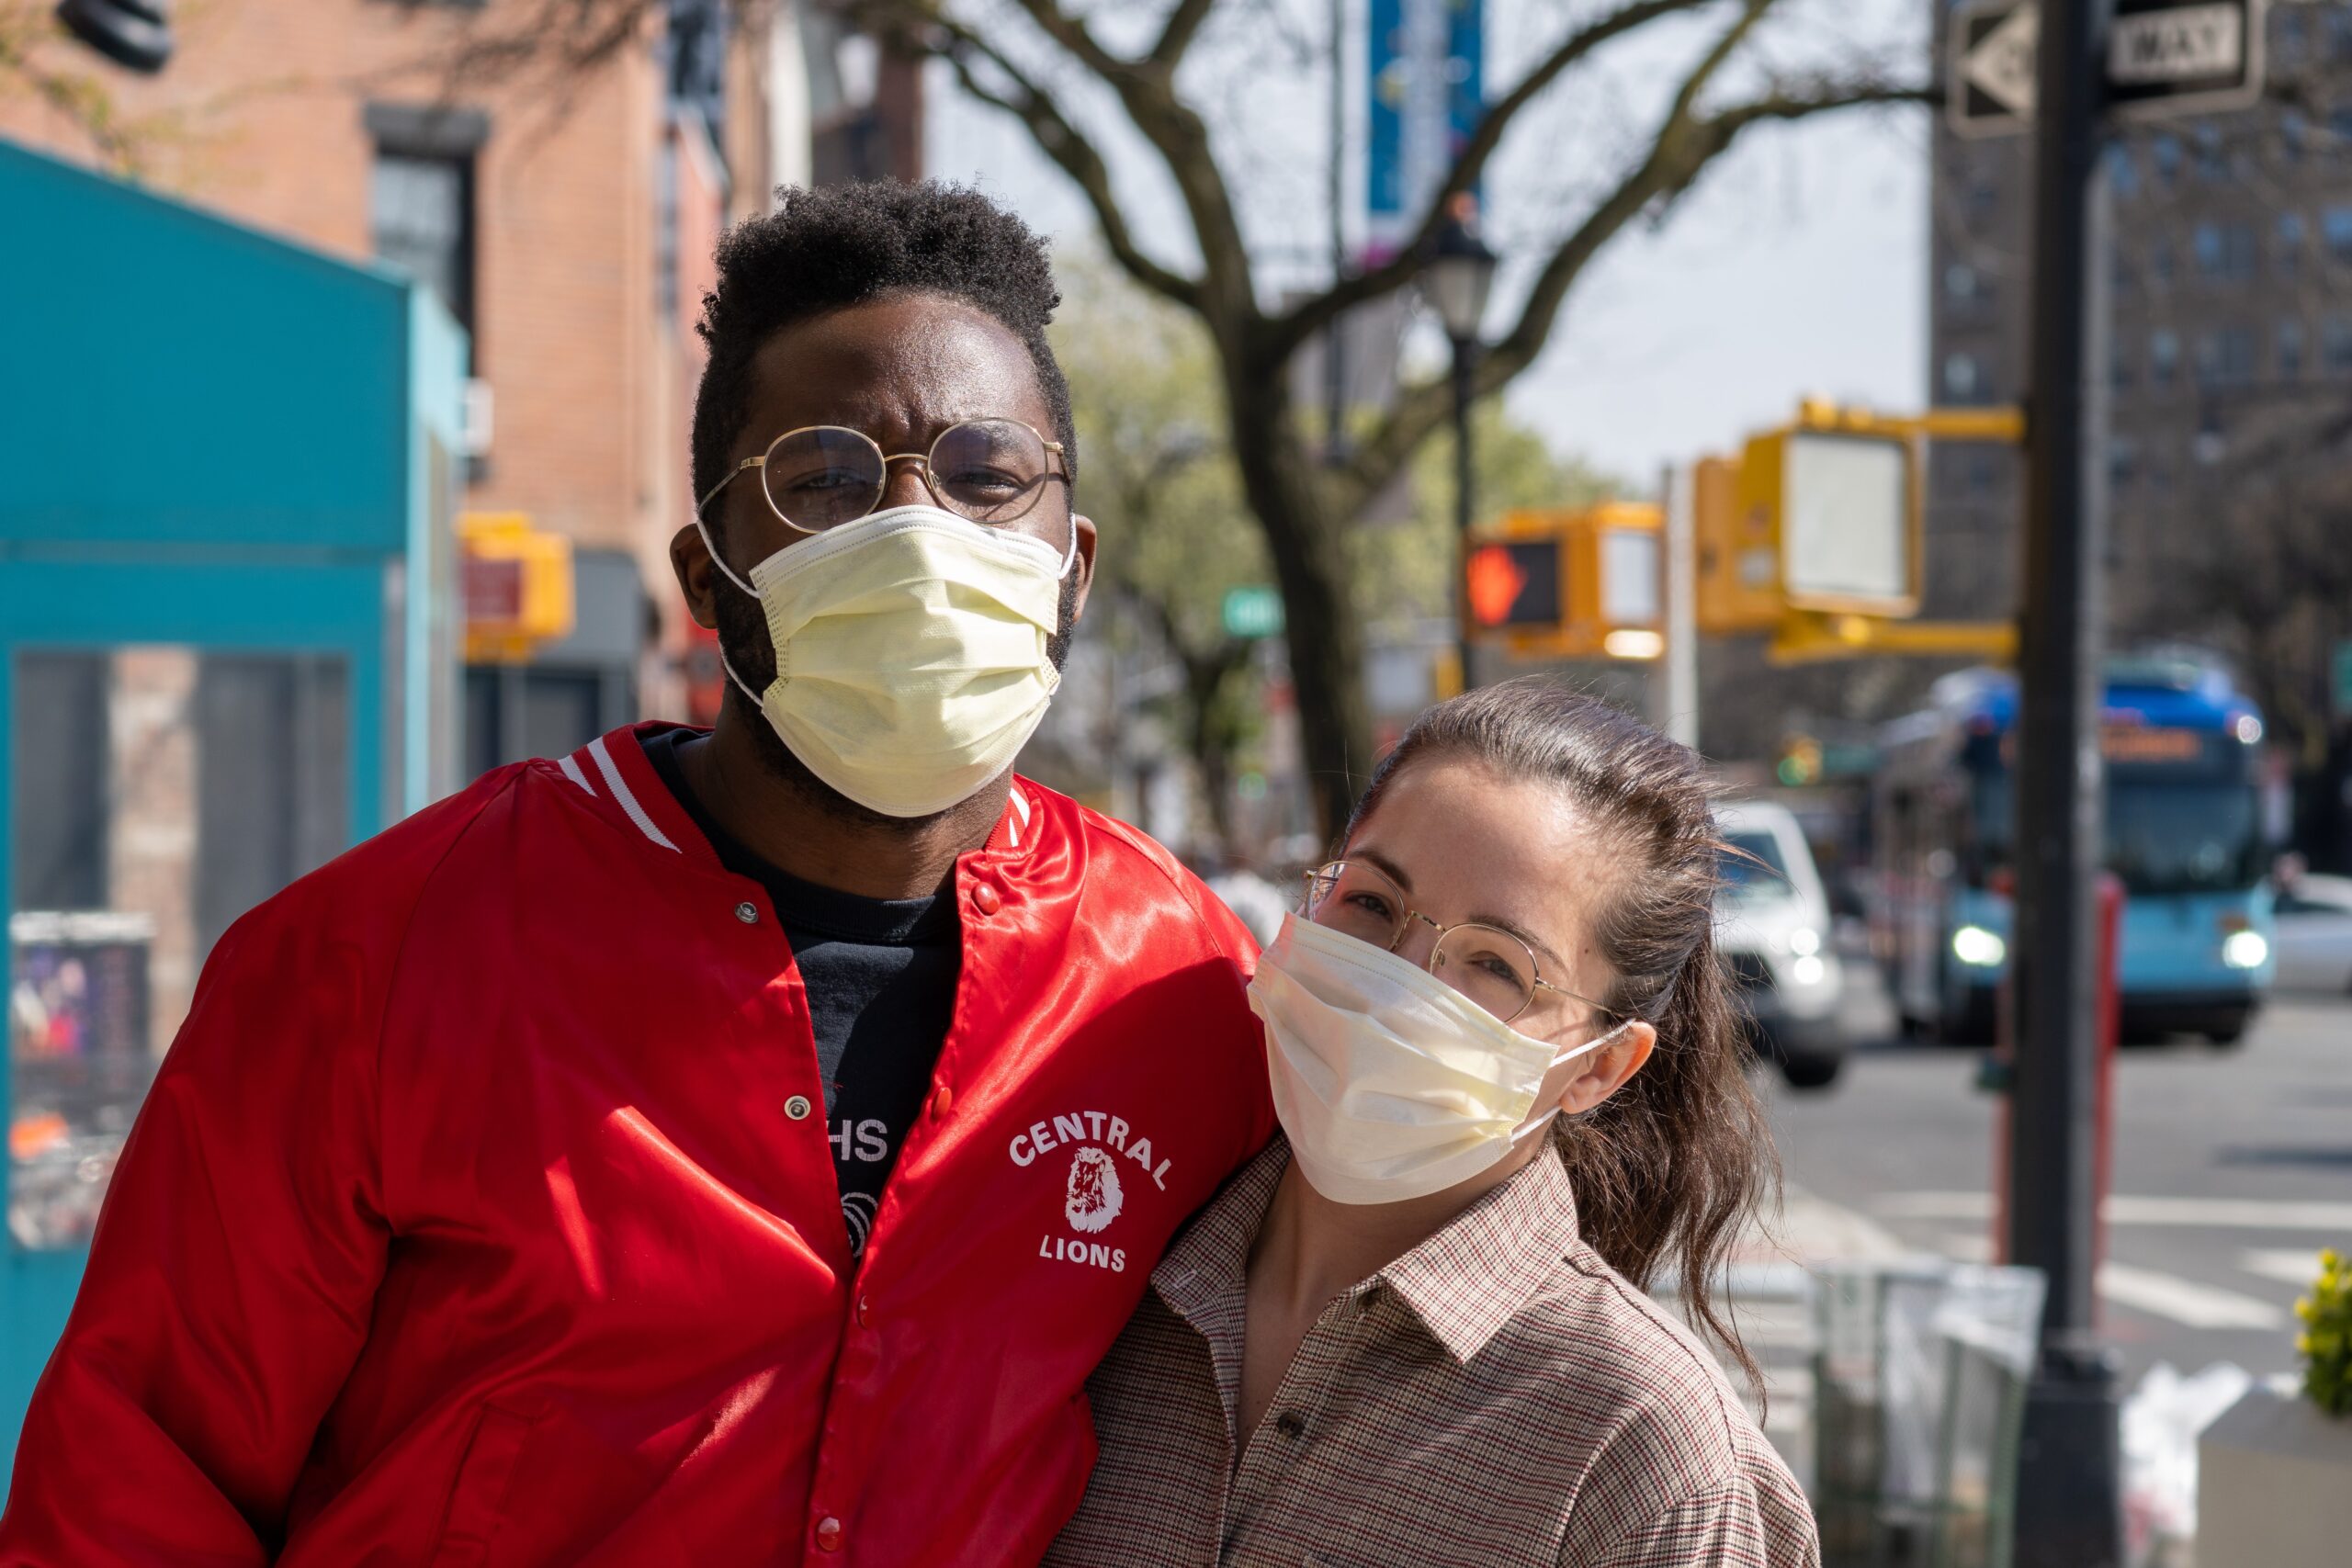 3 Benefits of Wearing A Mask During The COVID-19 Pandemic